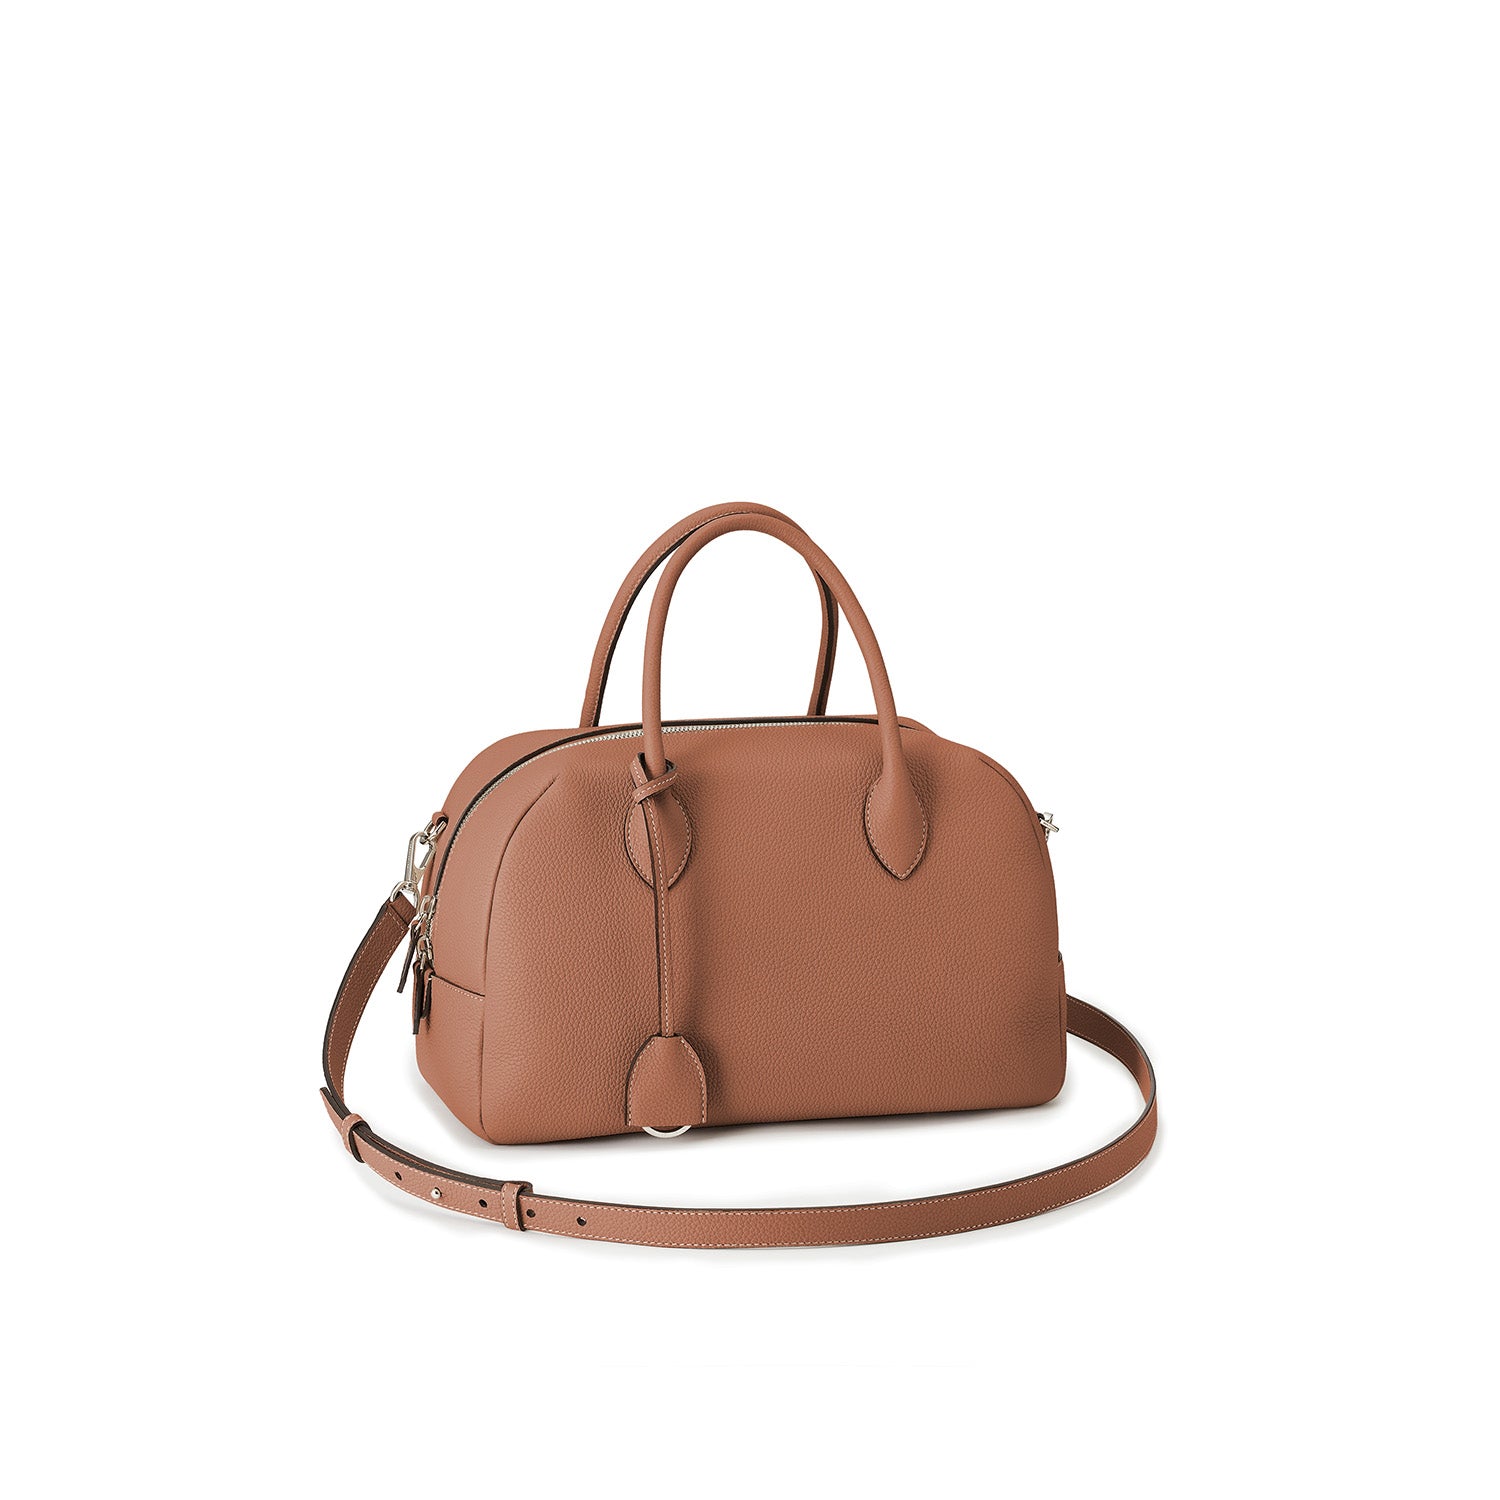 Ava Boston Bag in Shrink Leather (30 Small)